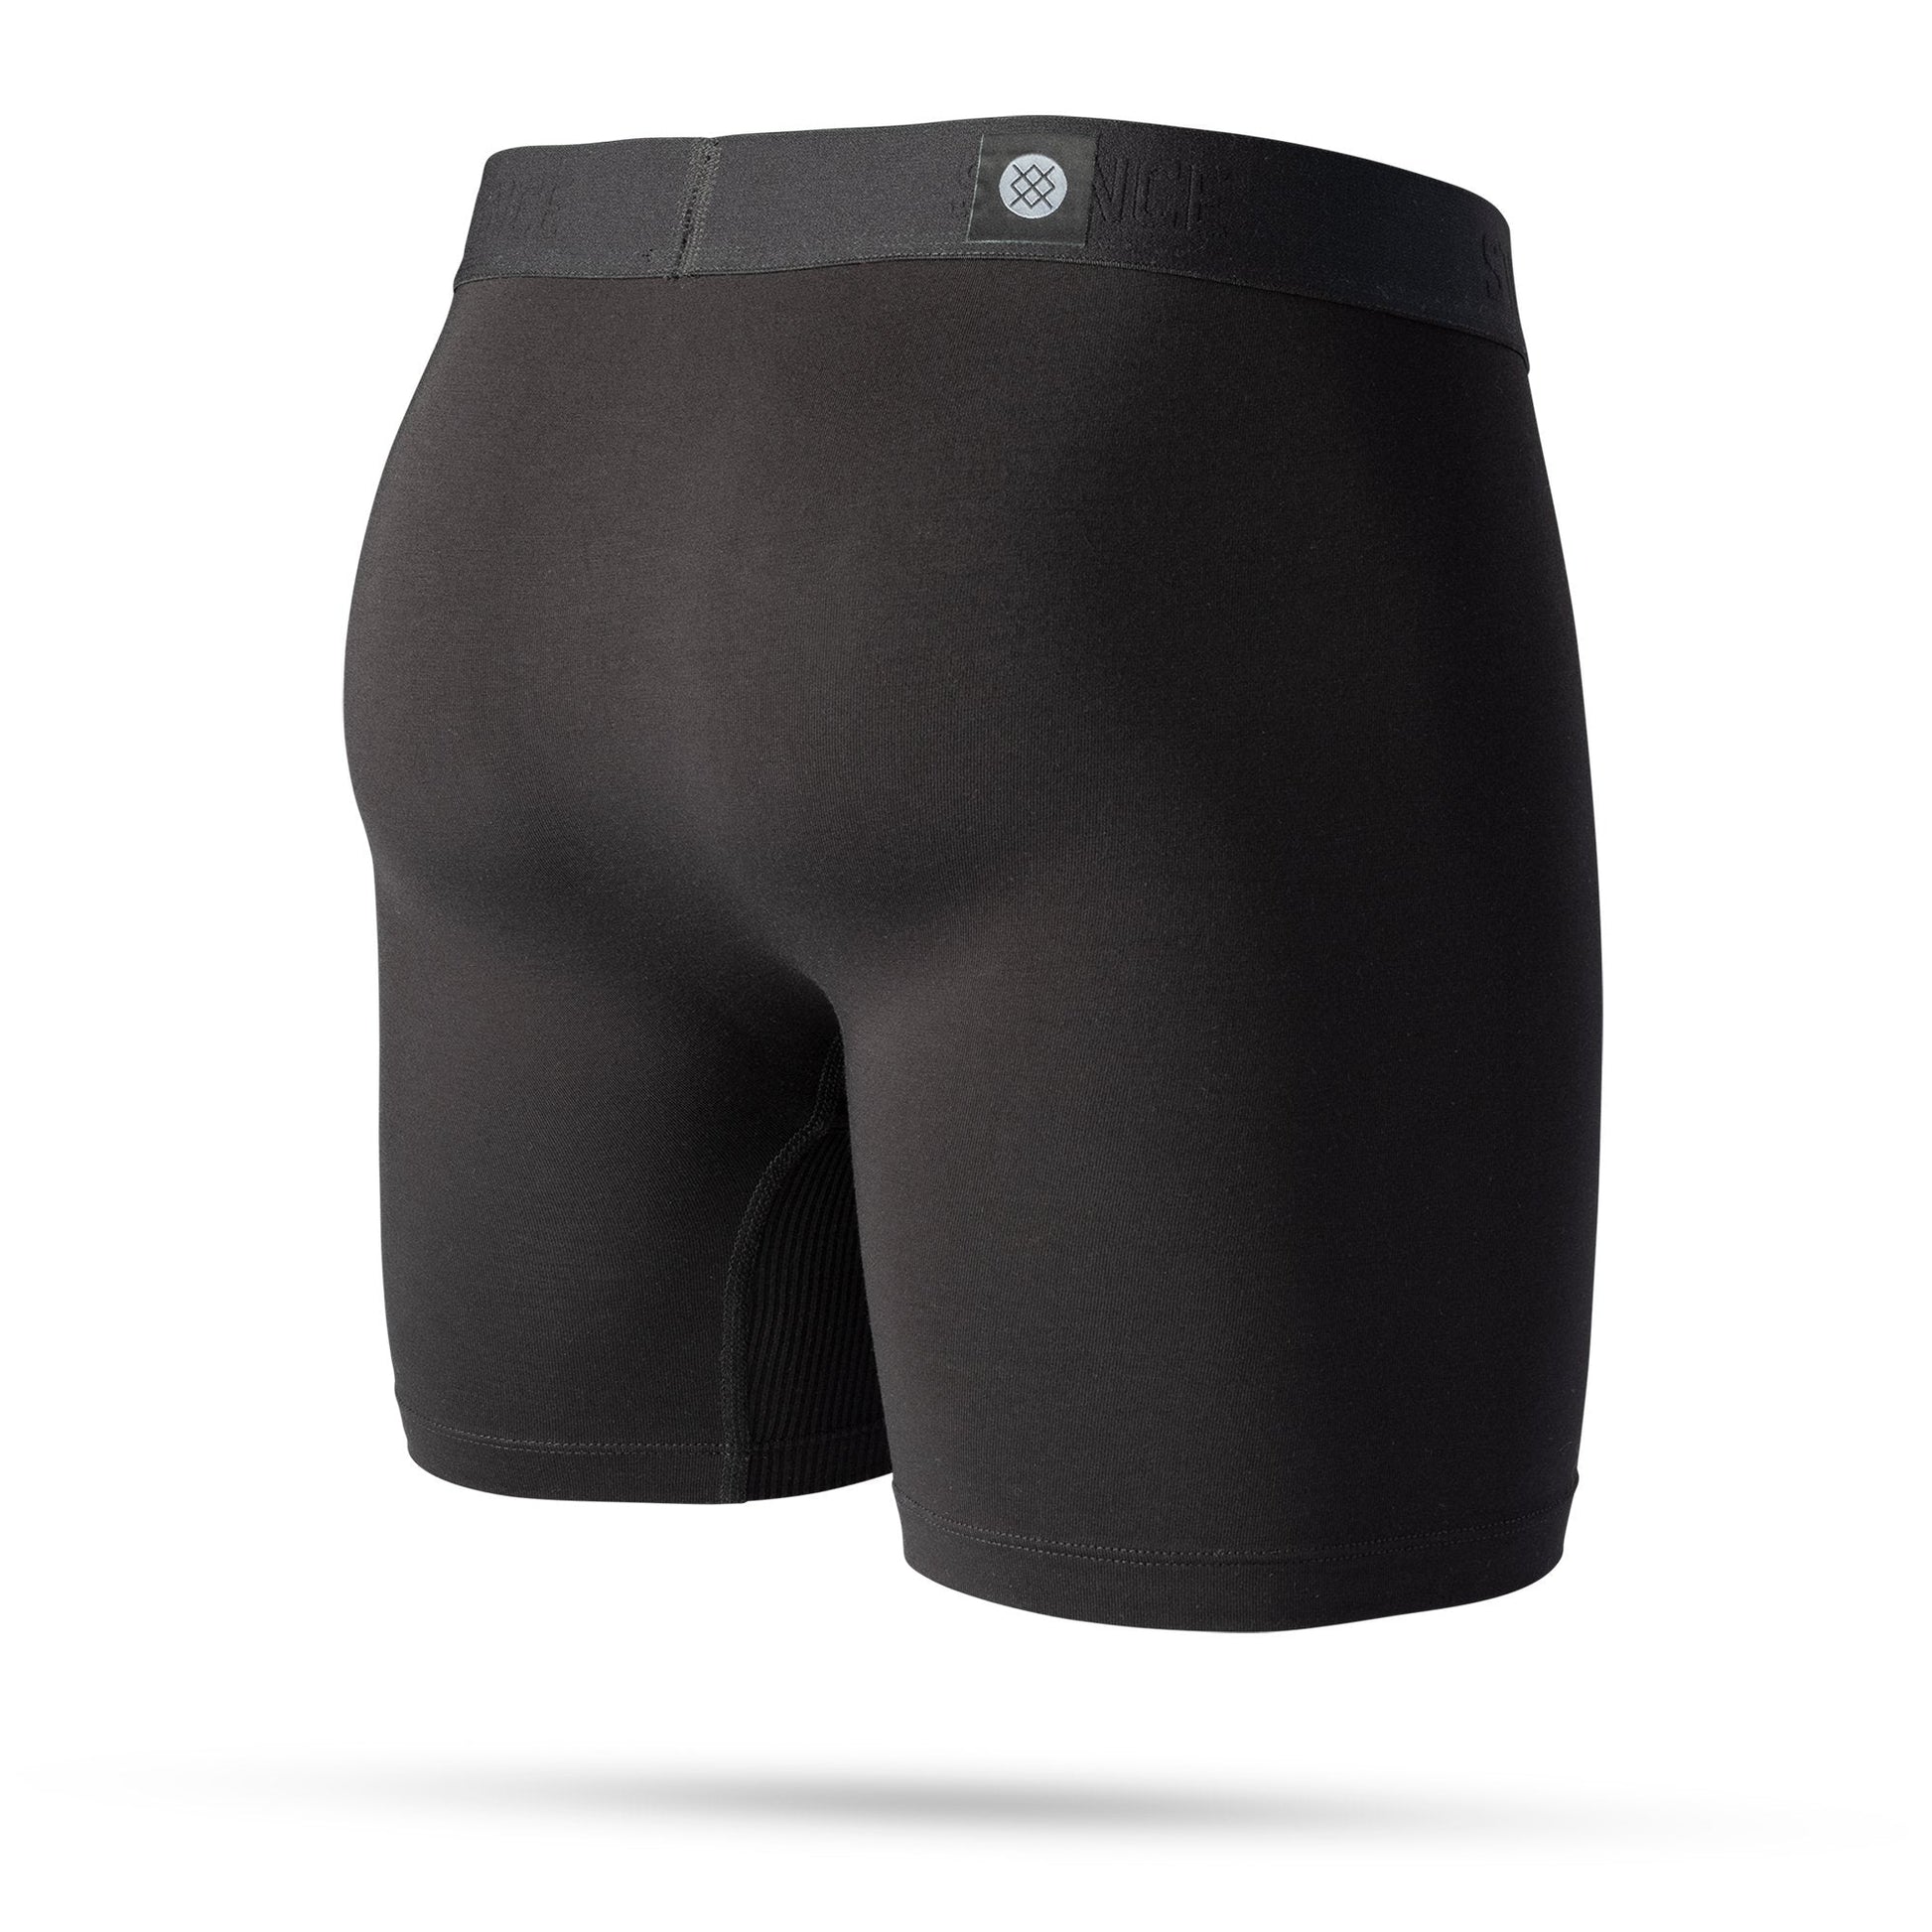 Stance Staple Boxer Brief Wholester Black – Stance Europe